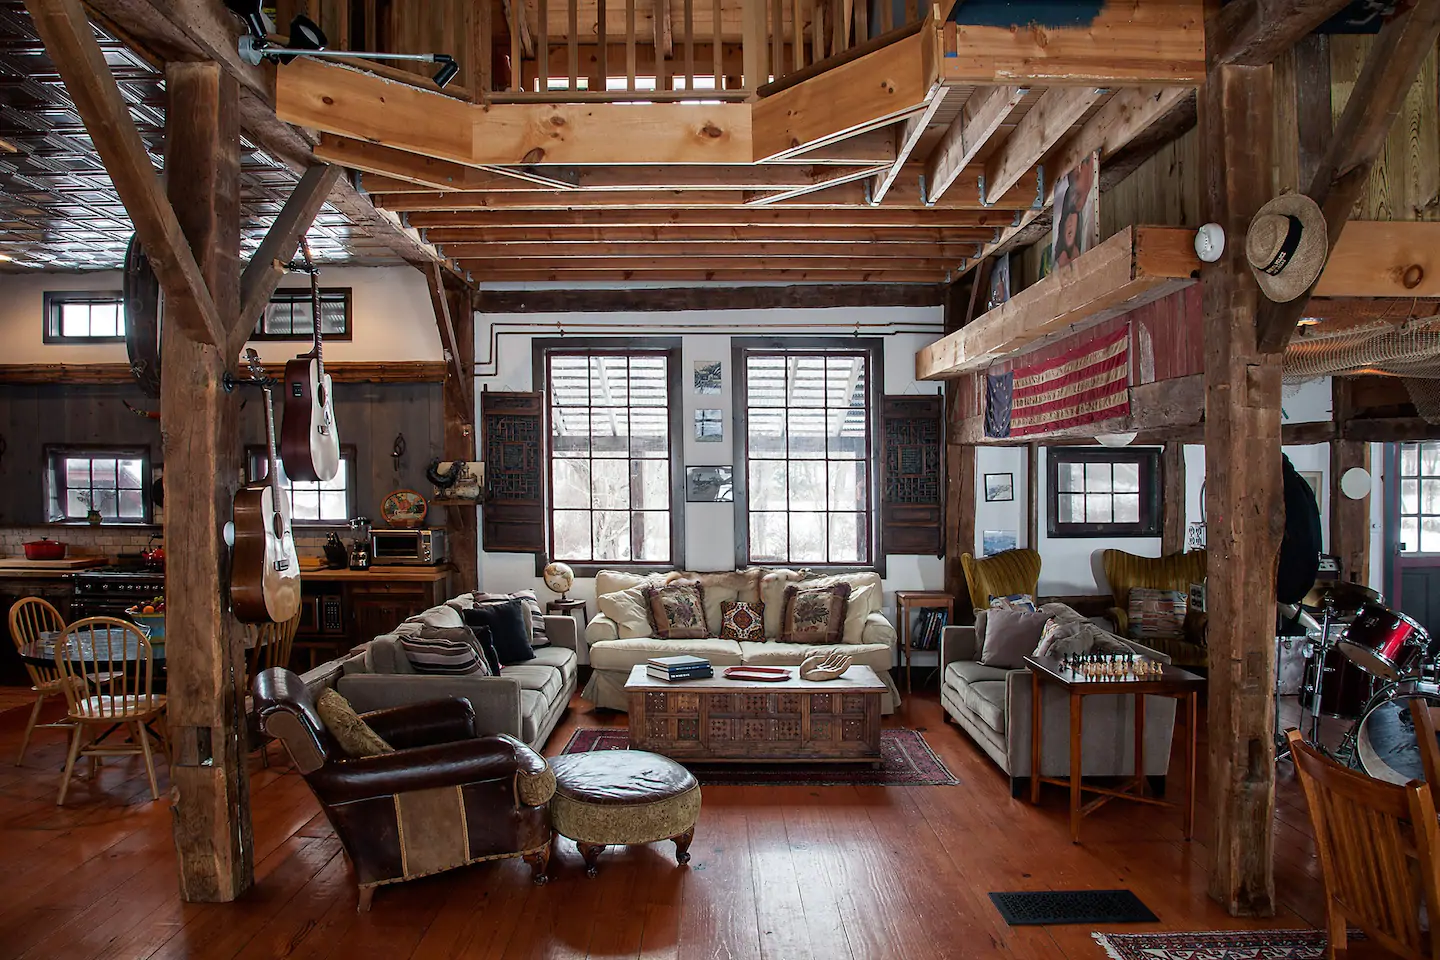 Interior of a log cabin with two floors. The bottom floor is a living room with plush grey and white couches set up around a coffee table. The top floor is a loft.